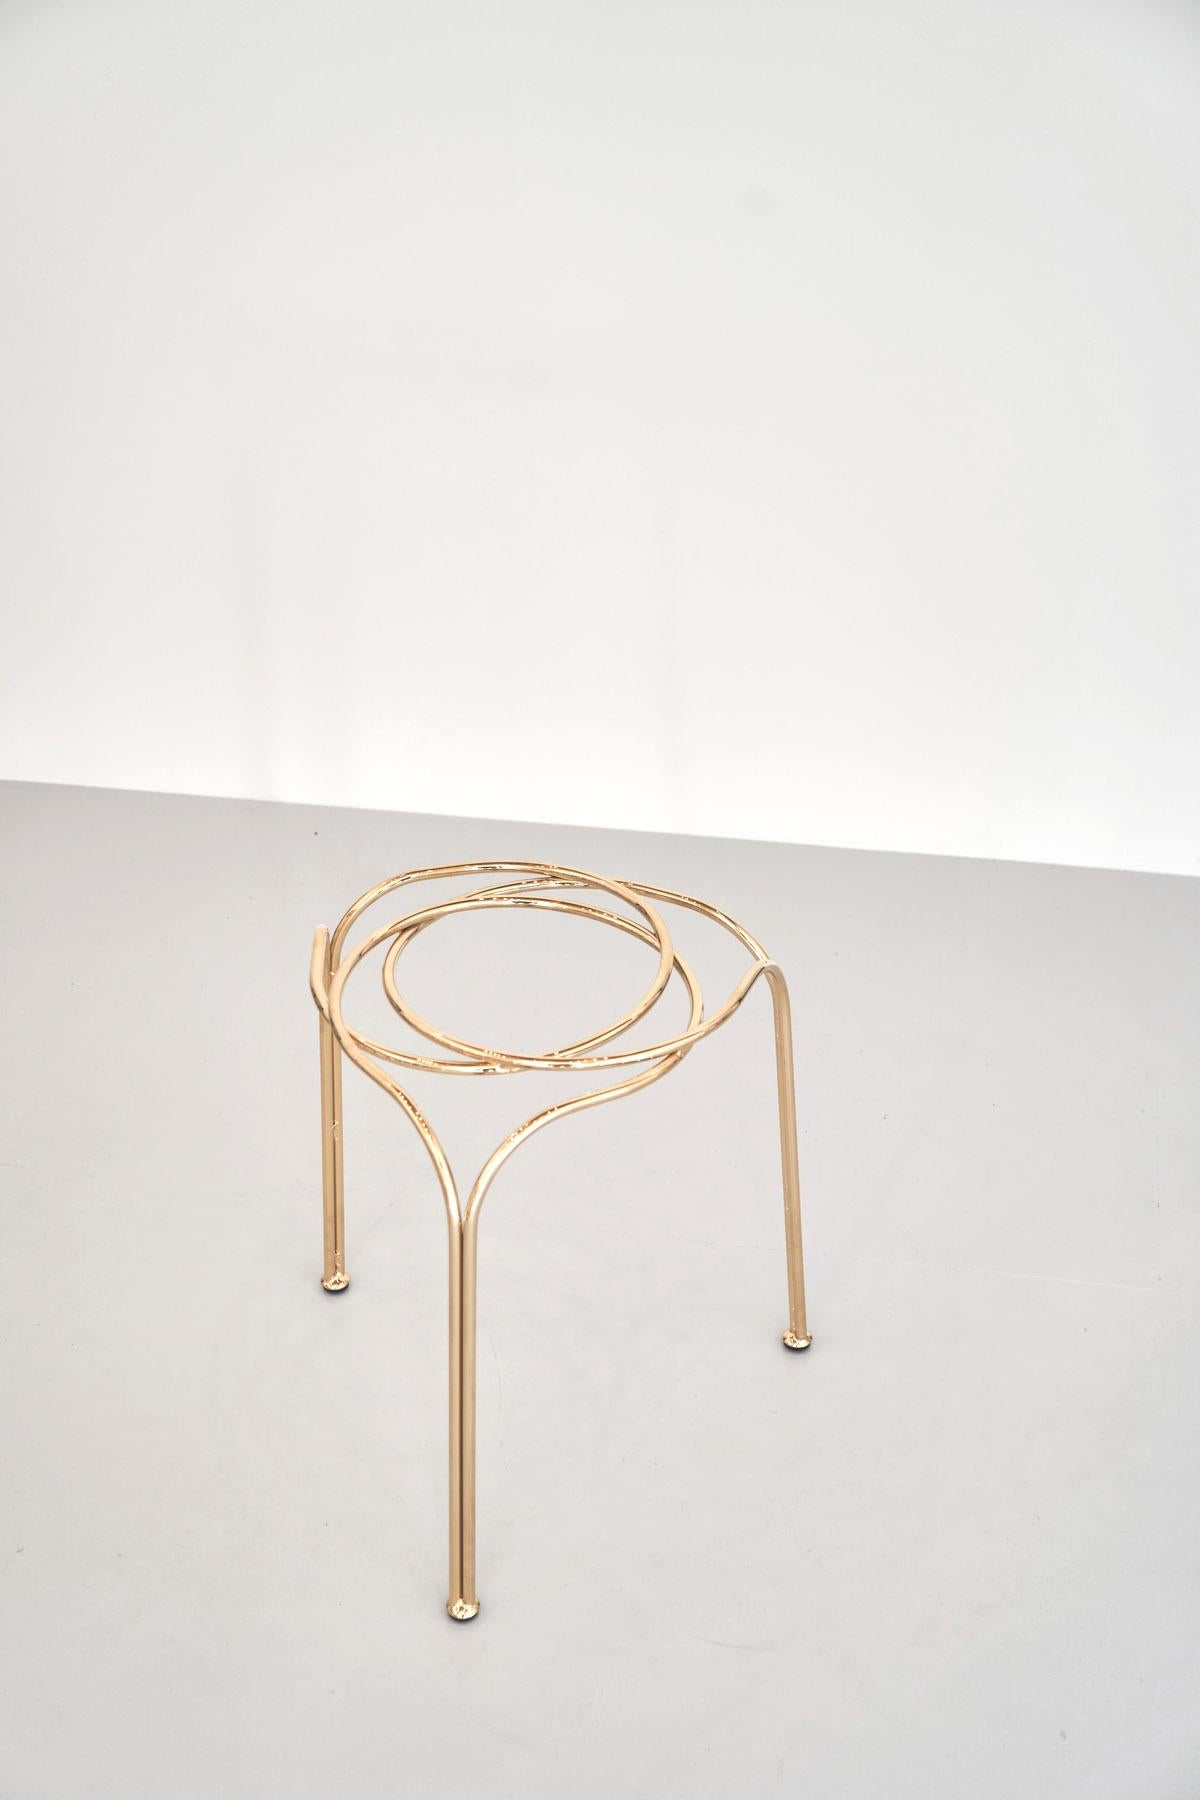 Flow Contemporary and Minimalist Gold Stool Made in Italy by LapiegaWD For Sale 3